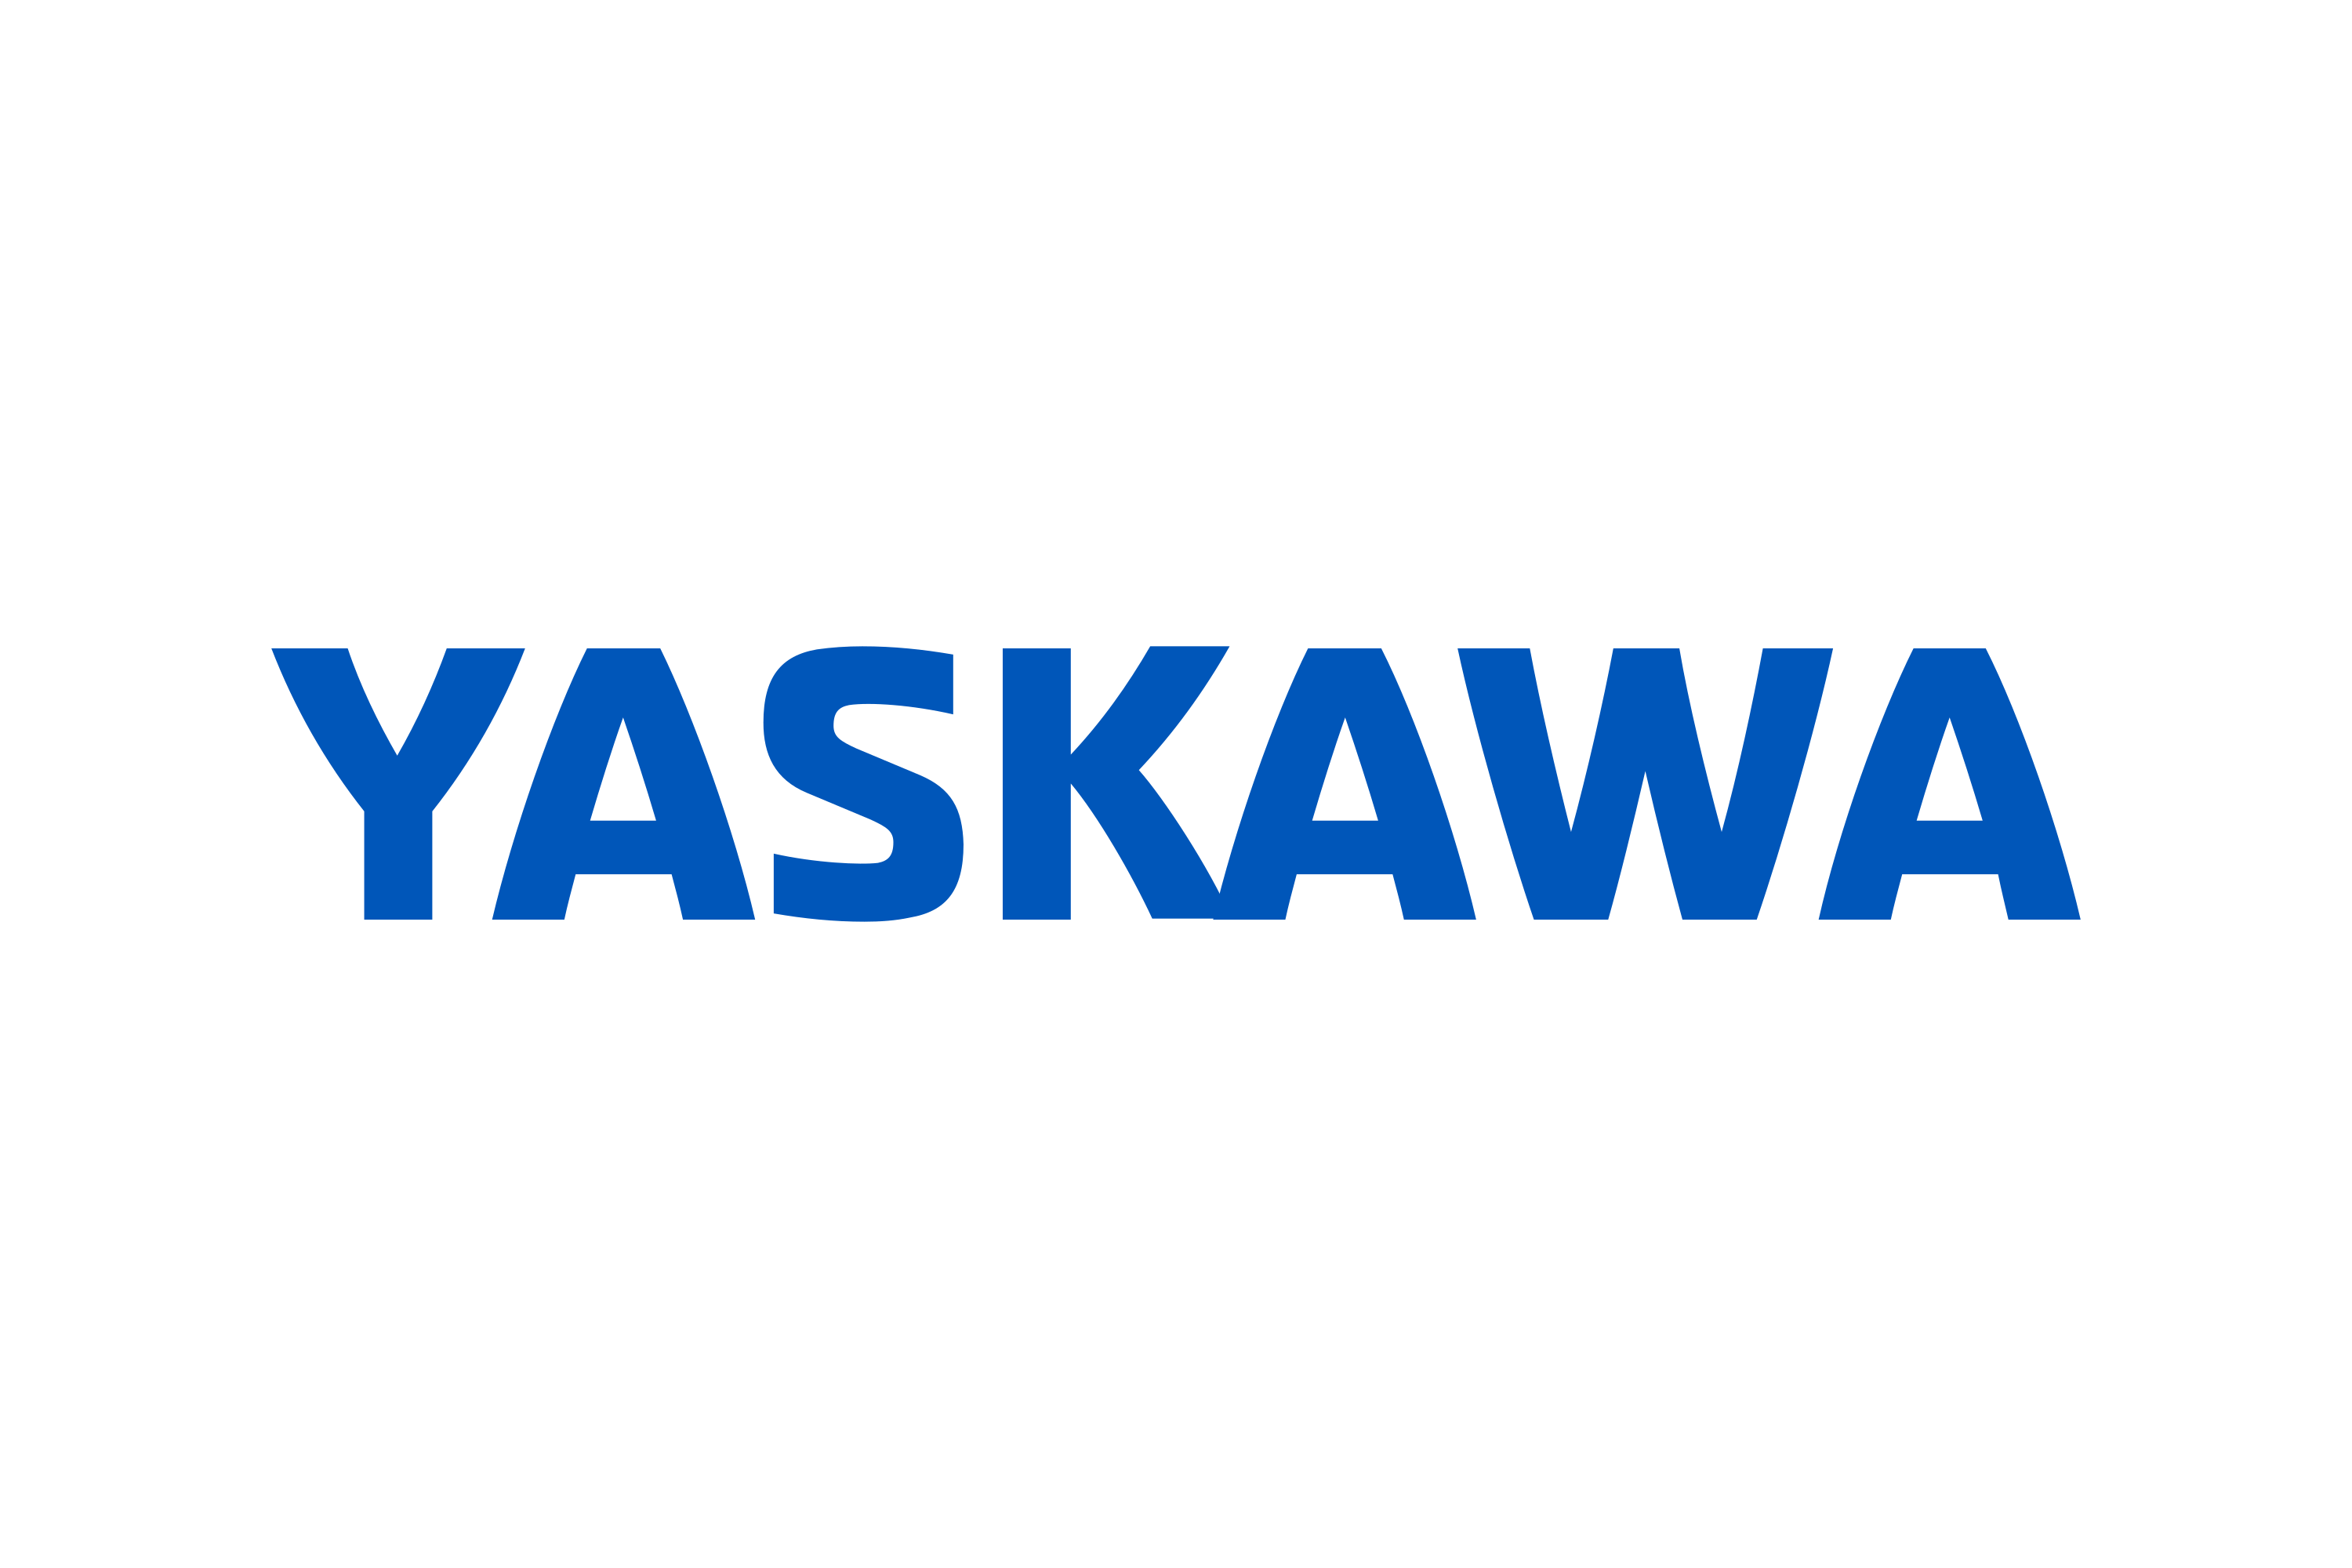 Download Yaskawa Electric Corporation Logo in SVG Vector or PNG File